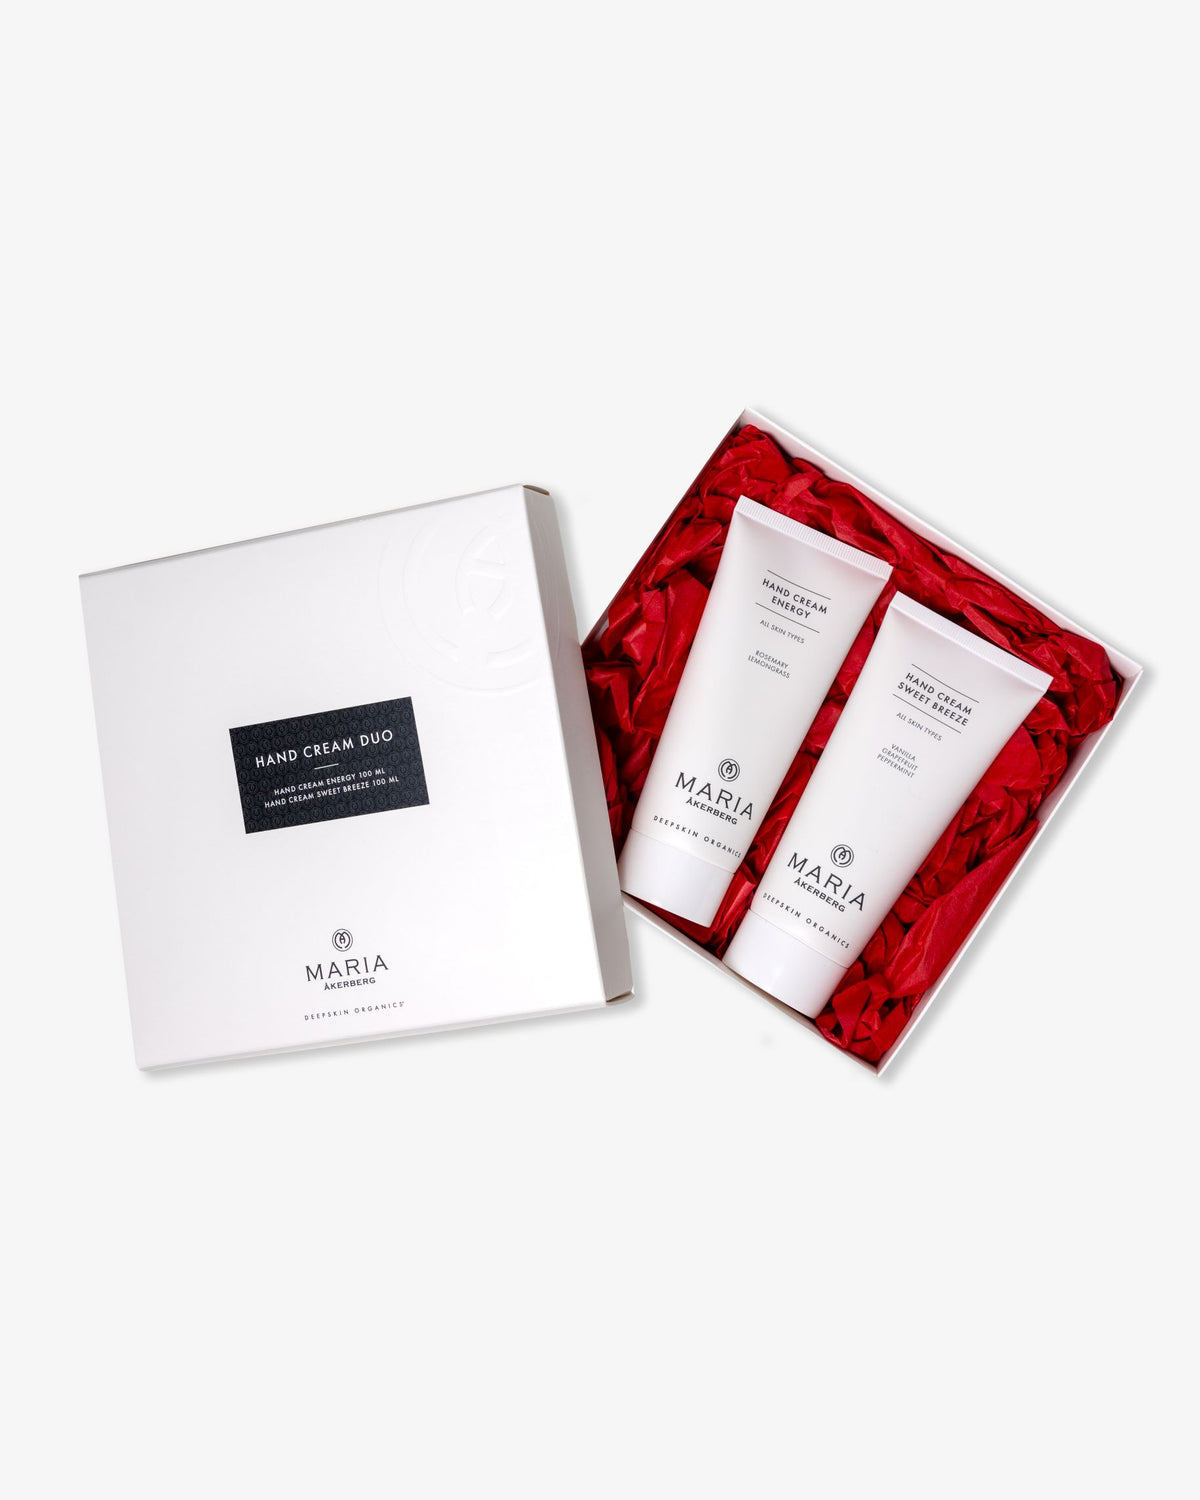 Hand Cream Duo Boxed Set LIMITED EDITION